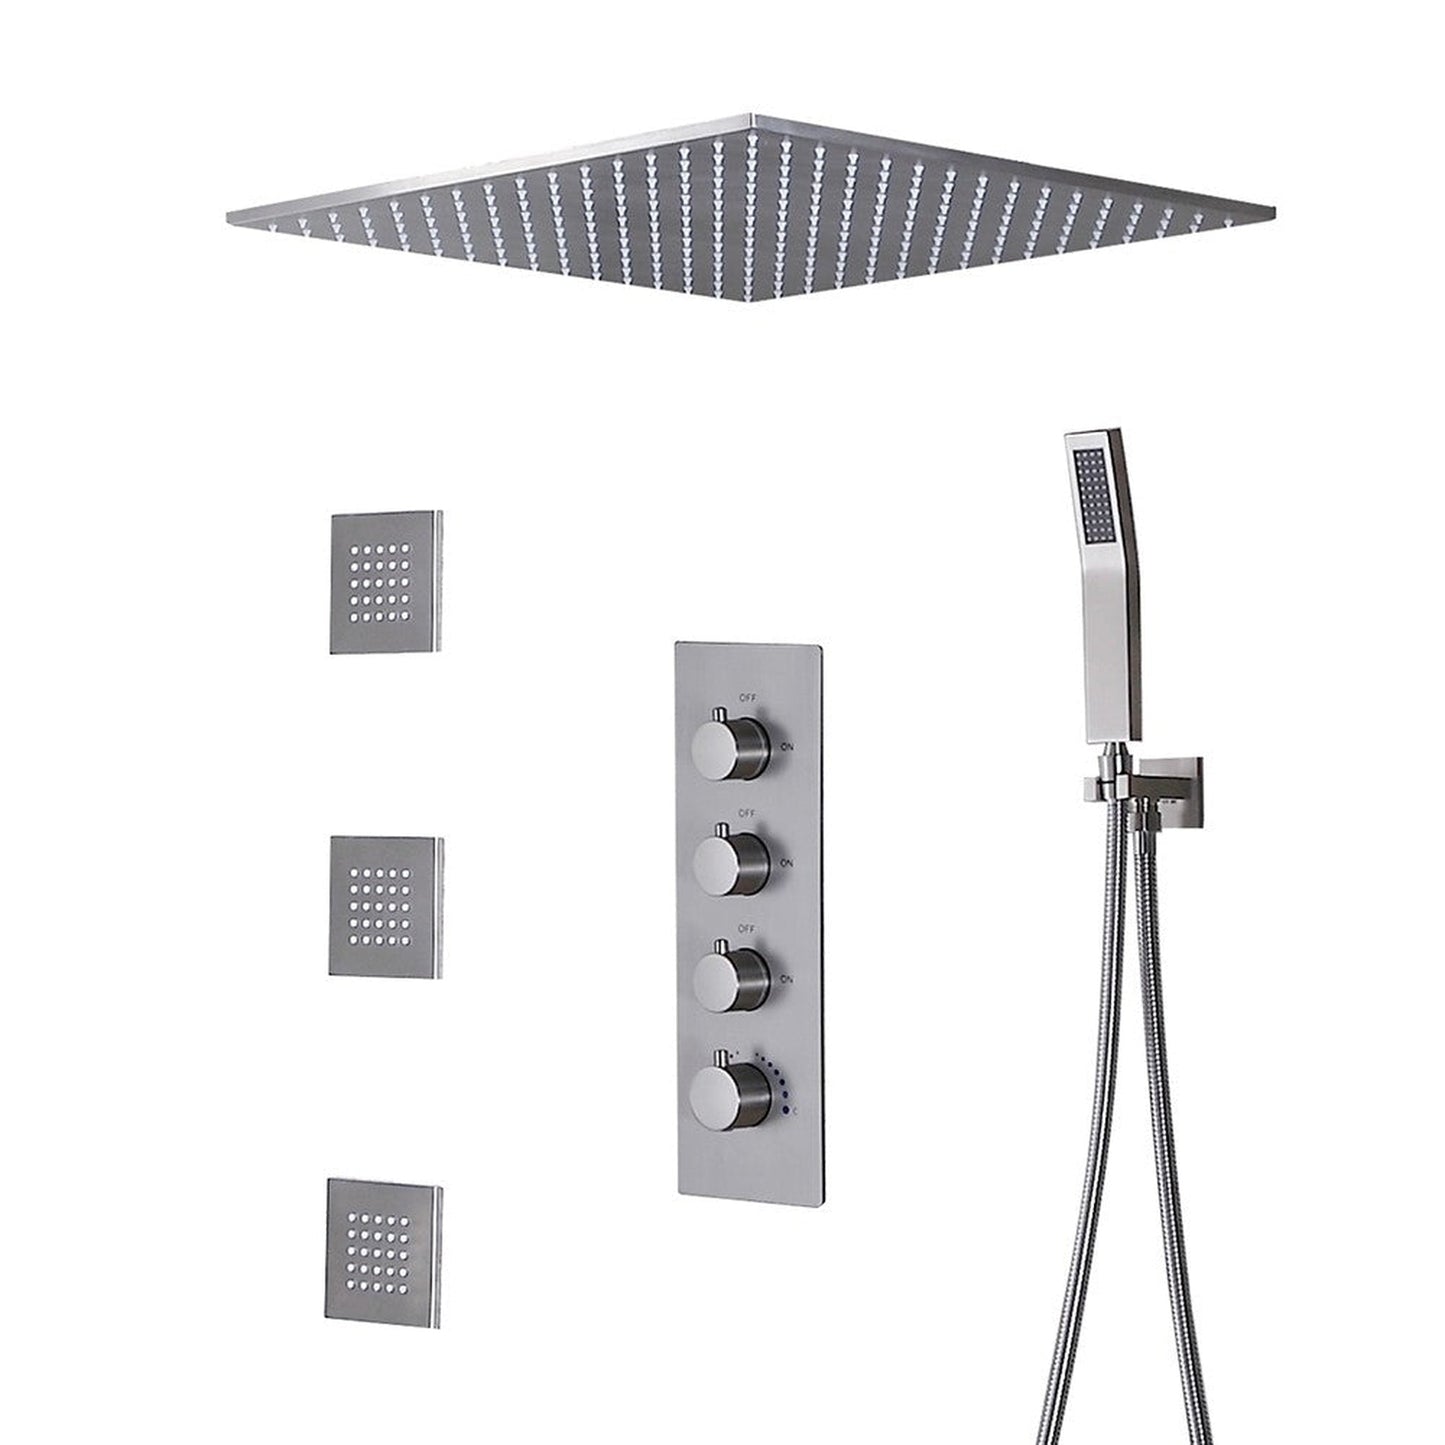 Fontana 24" x 24" Brushed Nickel Ceiling Mounted Thermostatic Valve Shower System With 3-Jet Sprays, Hand Shower and Water Powered LED Lights